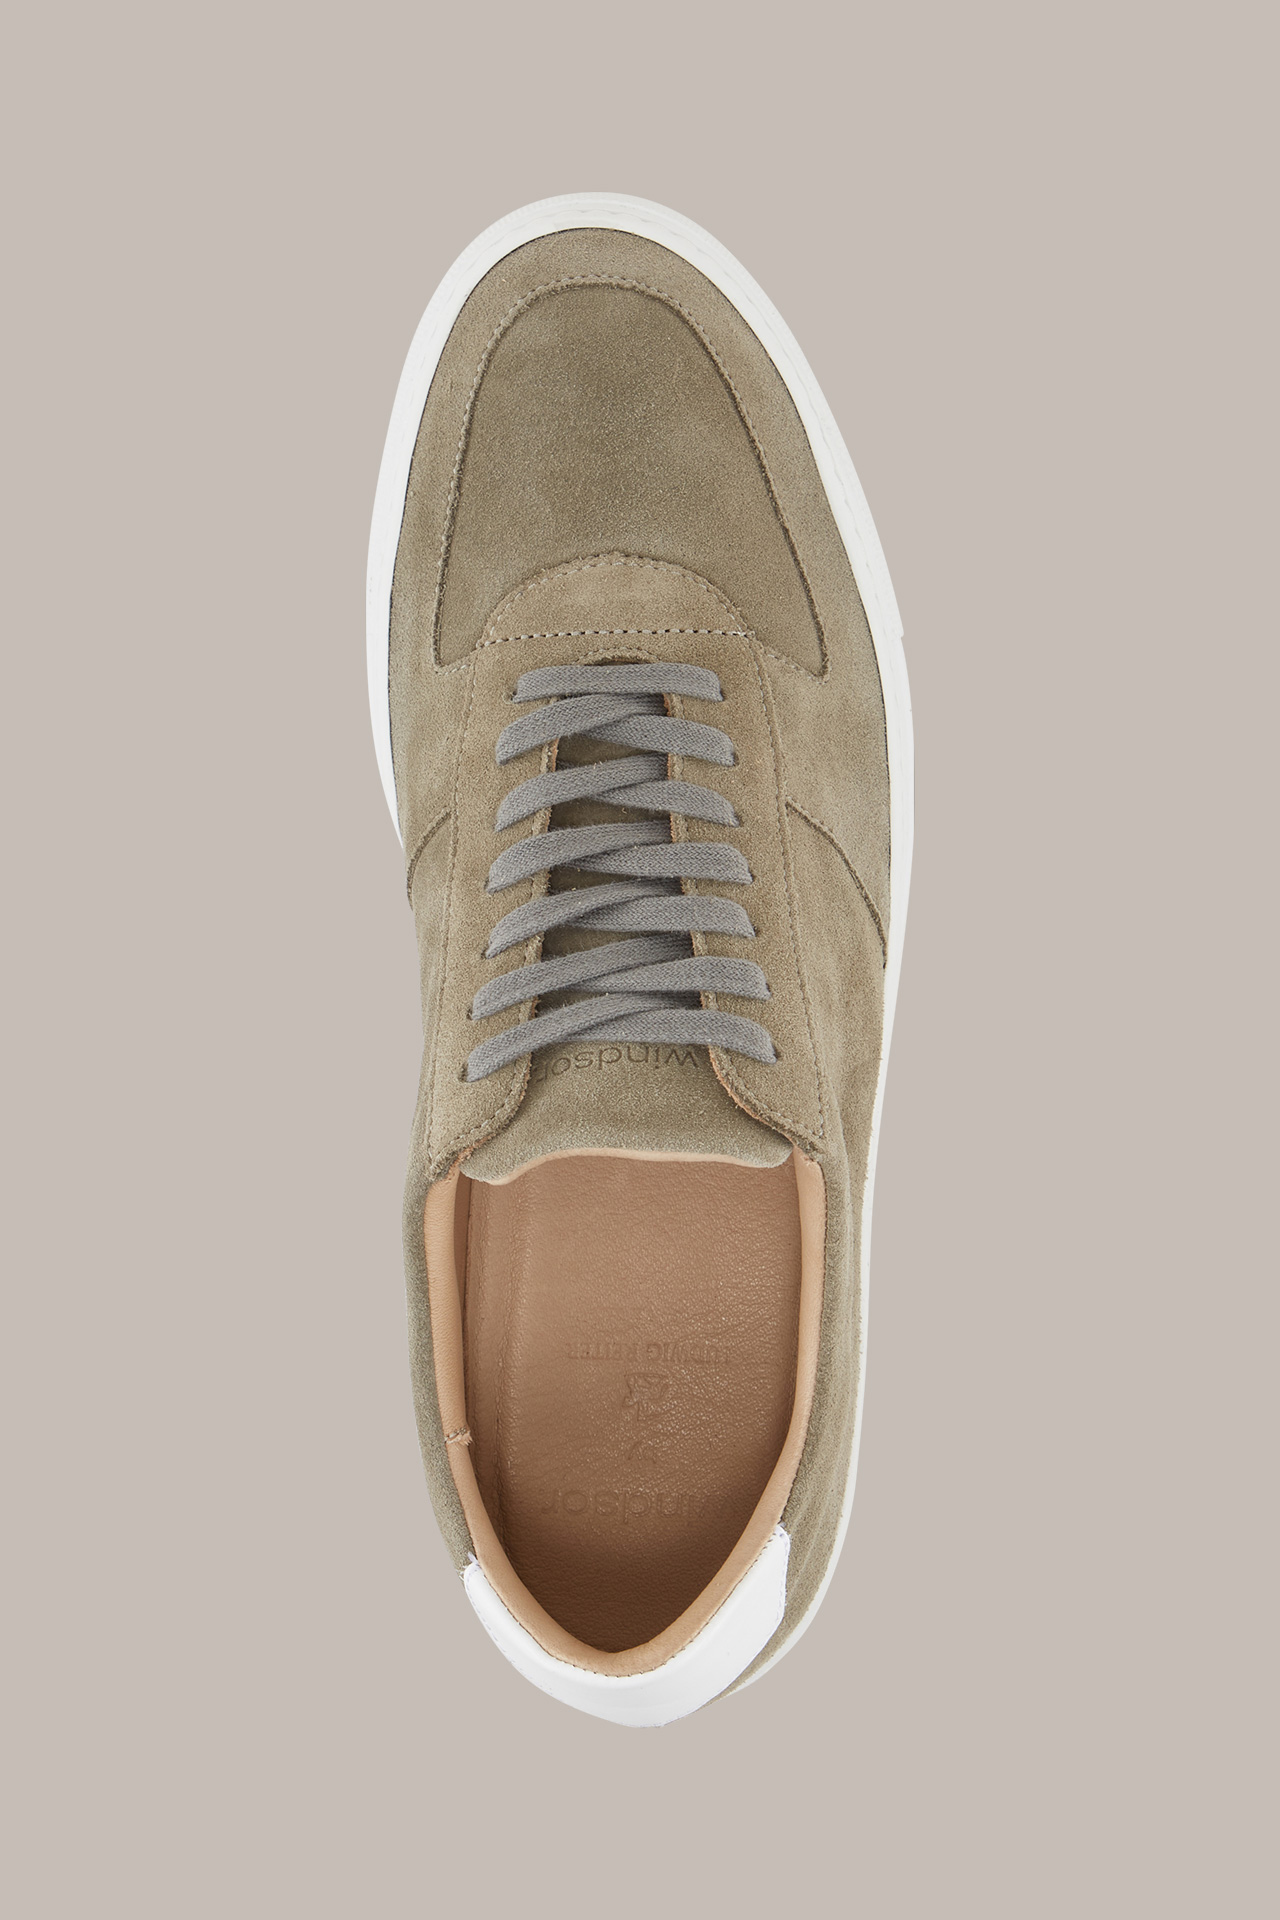  Flat Breeze Sneakers by Ludwig Reiter in Olive/White